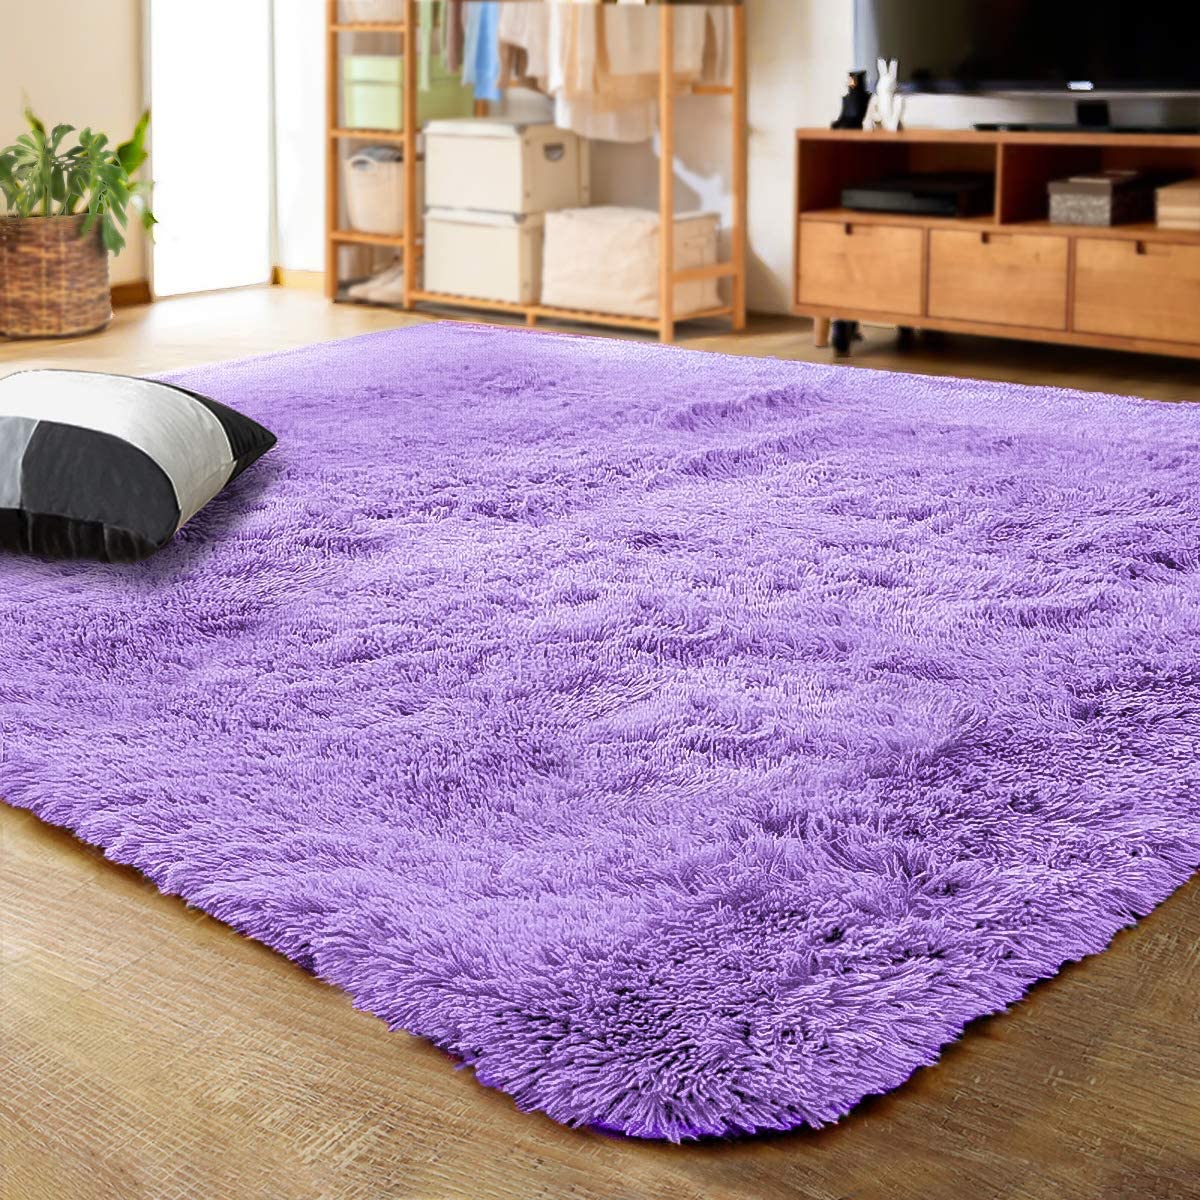 Plush Carpet: Large Area Rug for Home Decoration, Fluffy, and Hairy, Perfect for Living Room and Bedroom